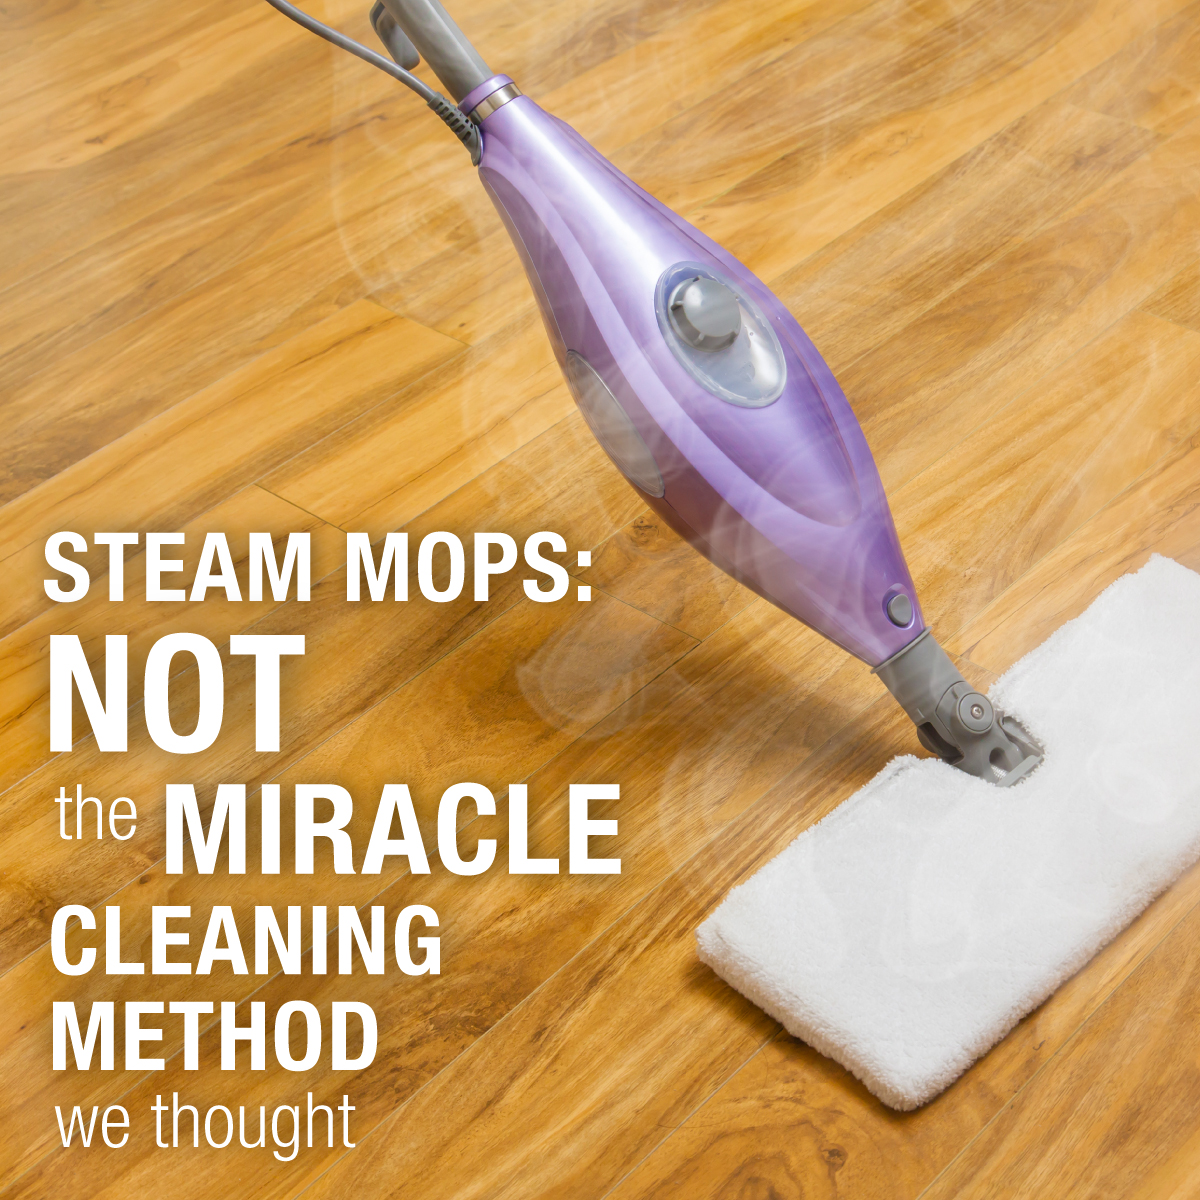 Steam Mops Not The Miracle Cleaning, Best Steam Mop For Luxury Vinyl Plank Flooring